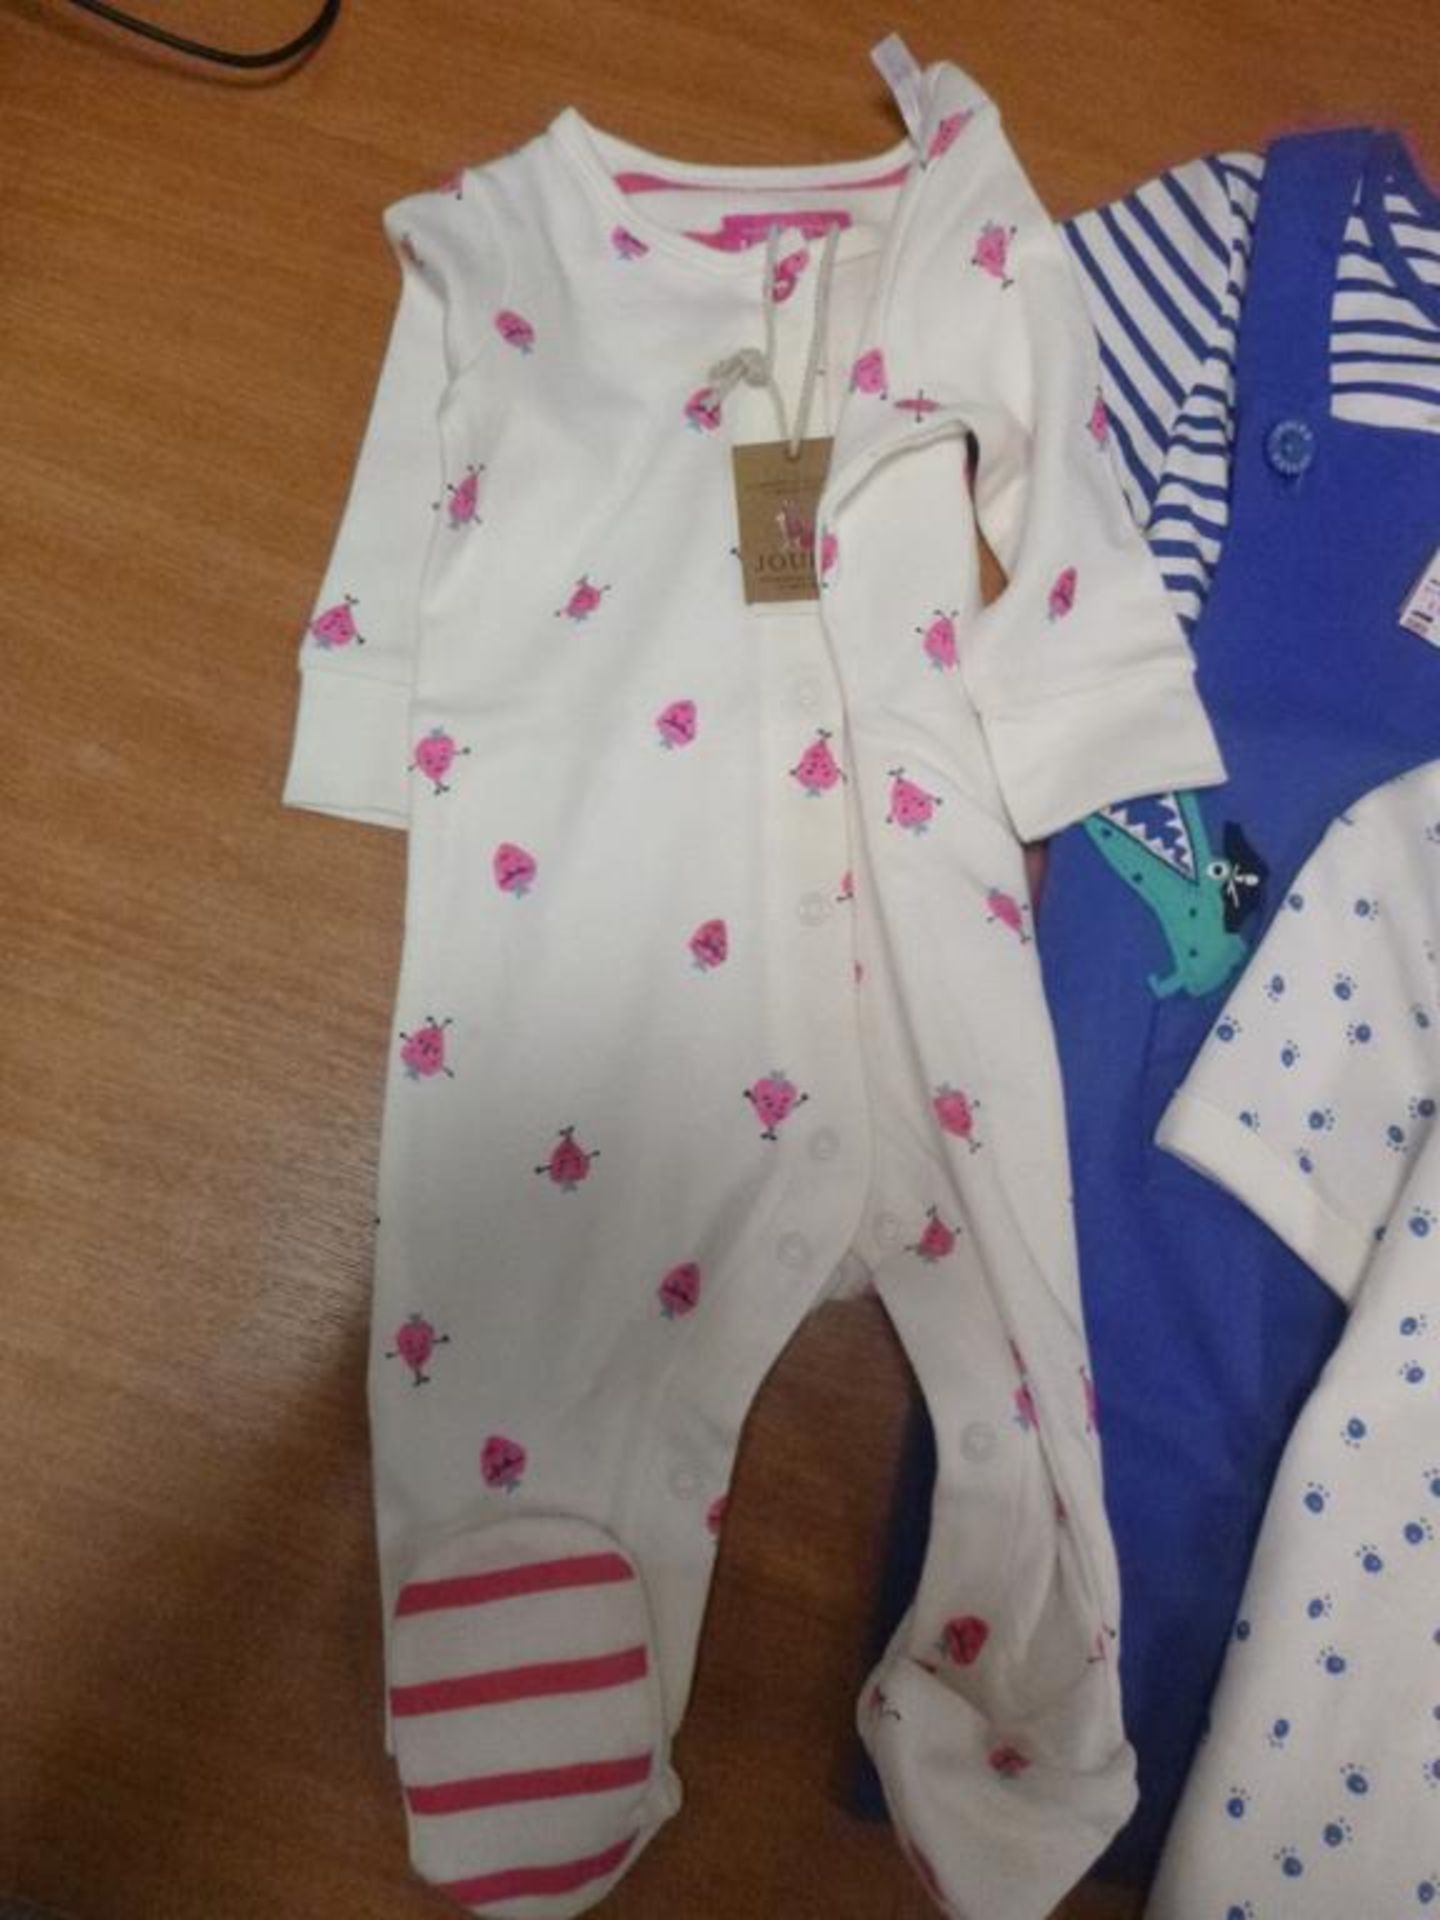 Qty of Babies All-In-one Suits, sizes 0-3mths - 18-24mths. Also 2 part sets, sizes 0-3mths - 18- - Image 2 of 9